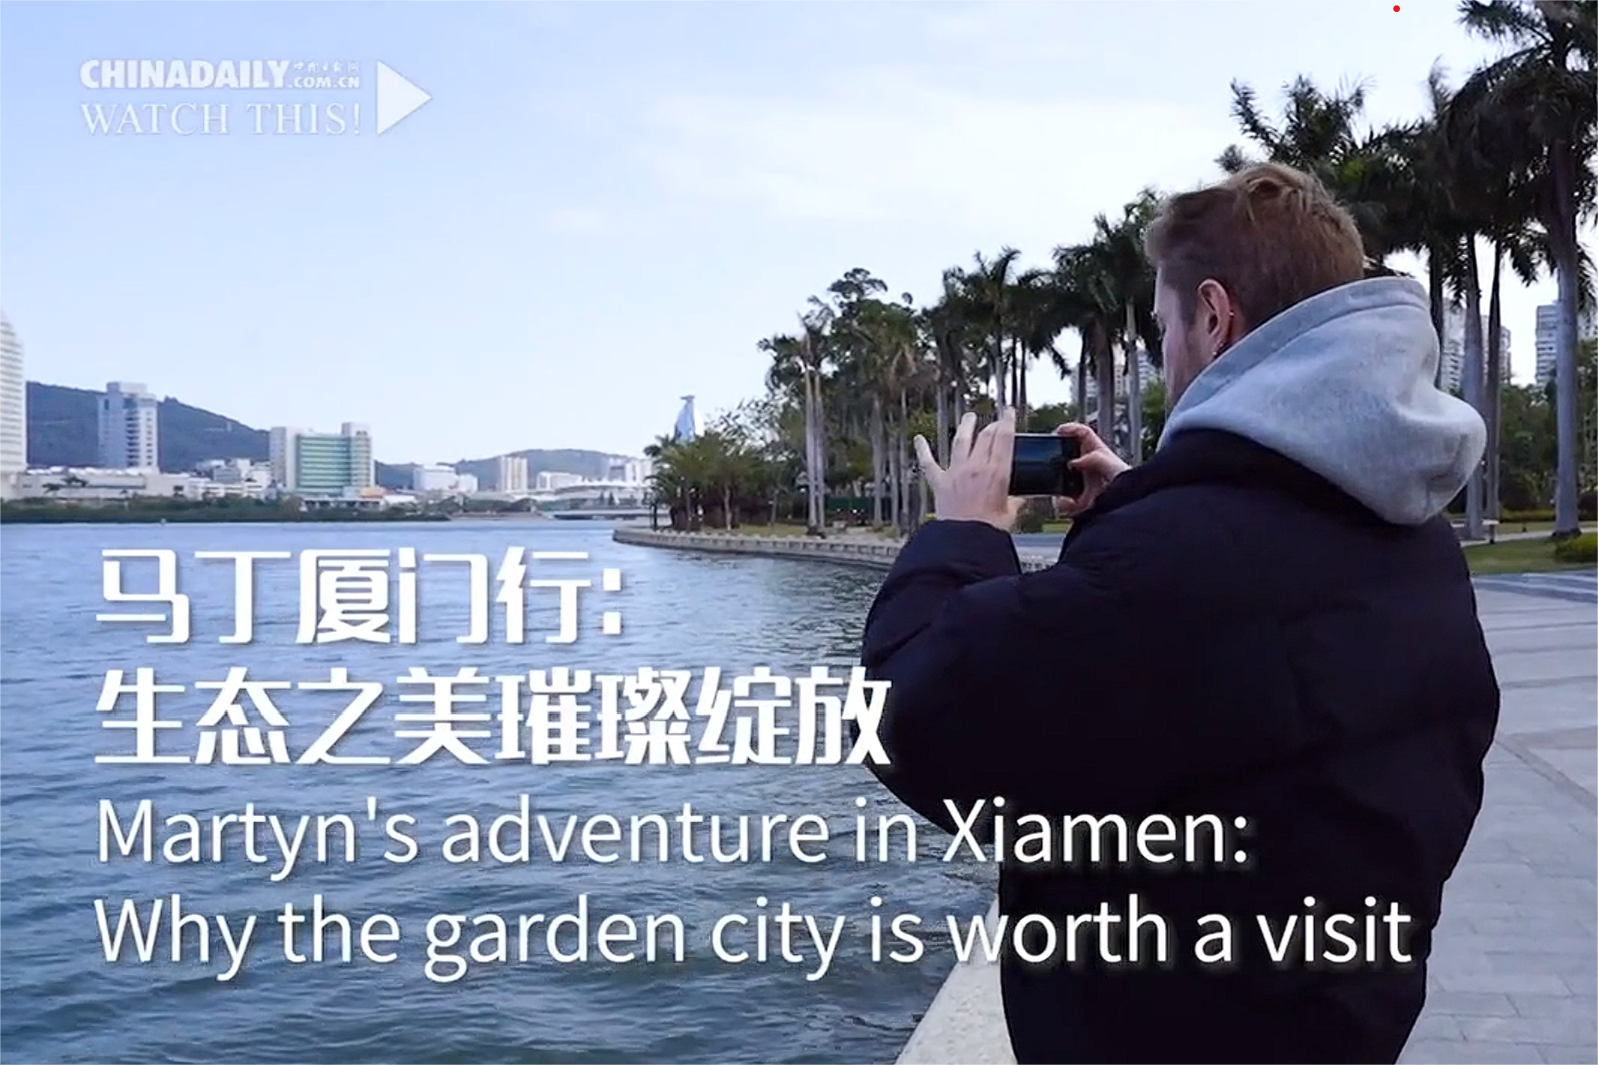 Martyn's adventure in Xiamen: Why the garden city is worth a visit